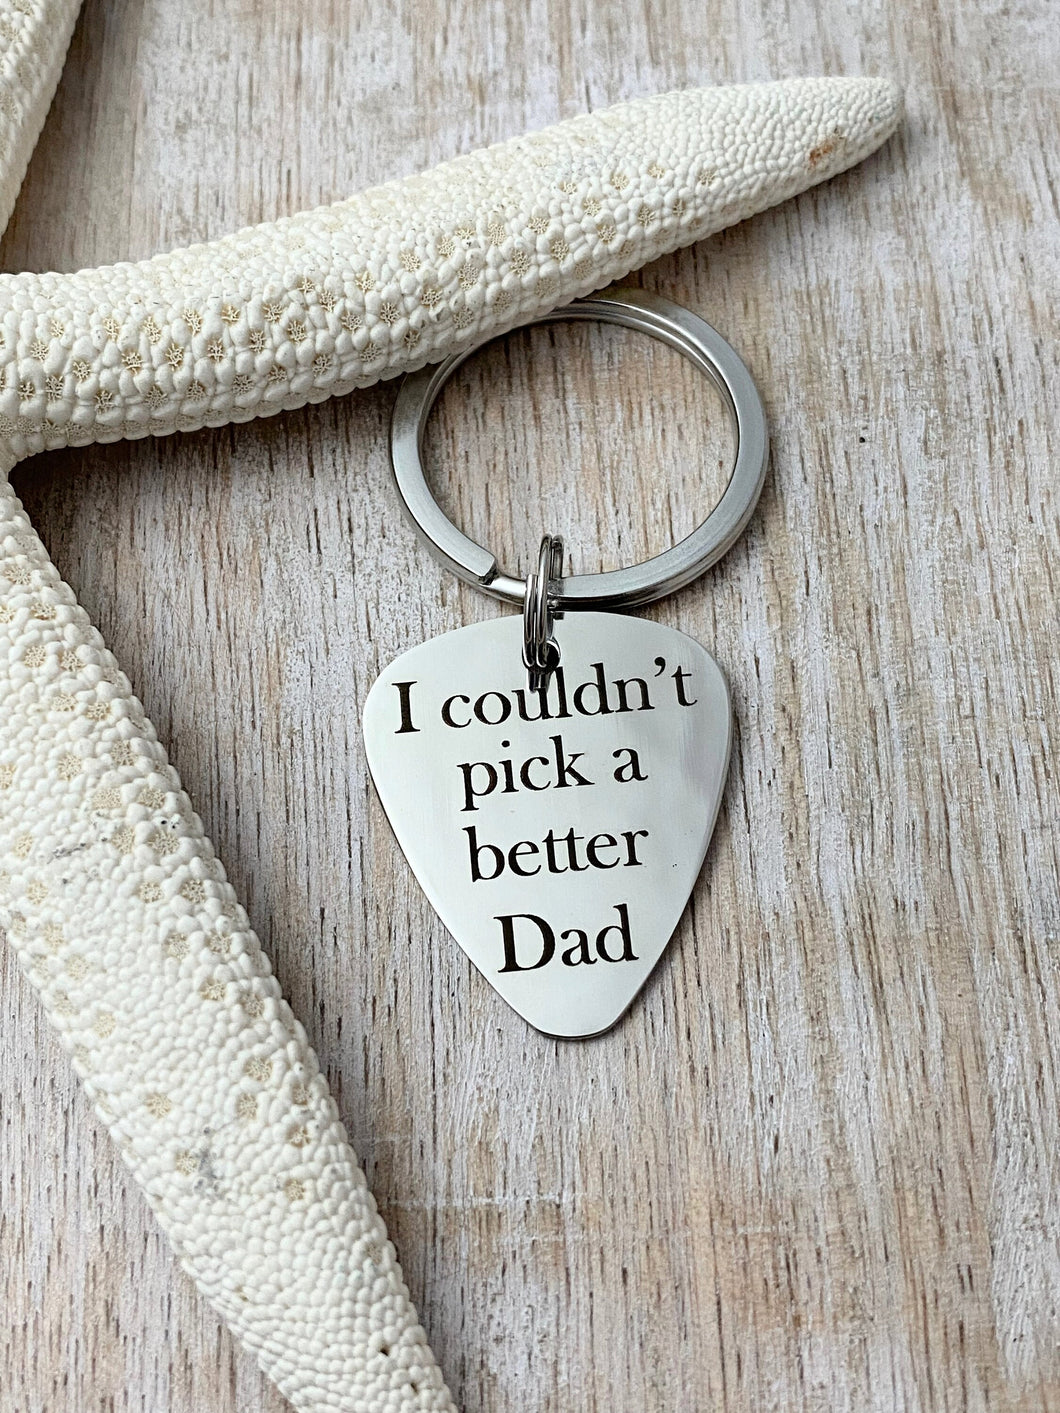 I couldn't pick a better Dad - silver tone stainless steel engraved guitar pick - Valentine's gift for Dad - music lover - Father's Day gift